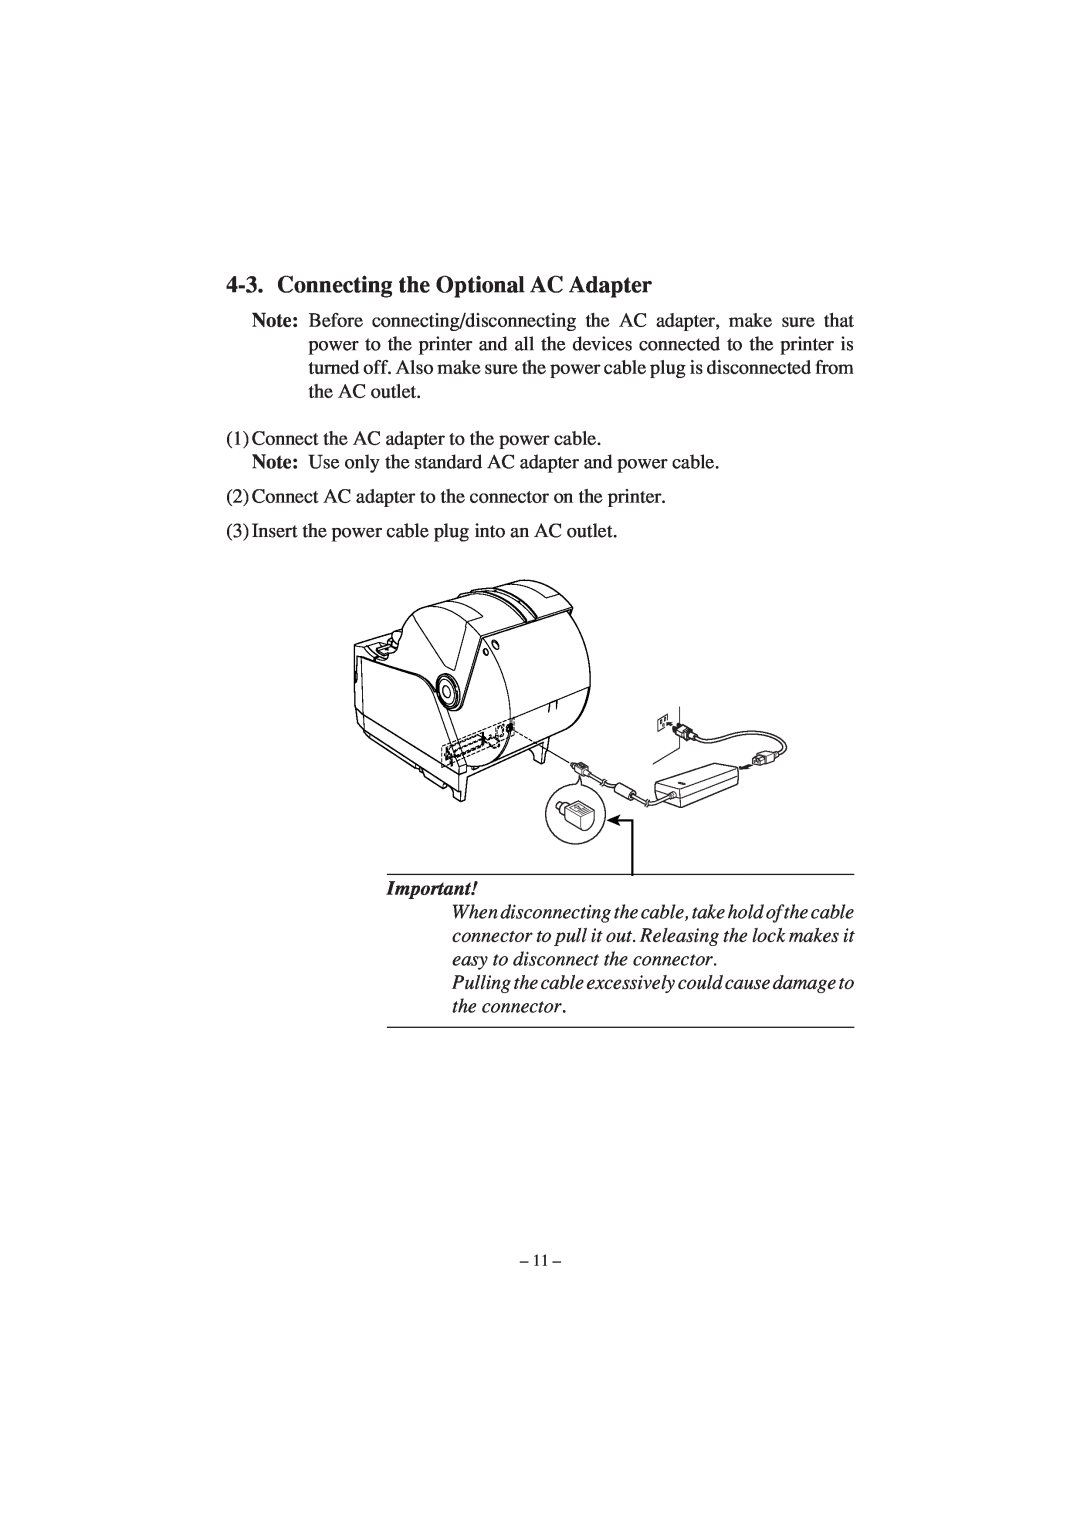 Star Micronics TSP1000 user manual Connecting the Optional AC Adapter 